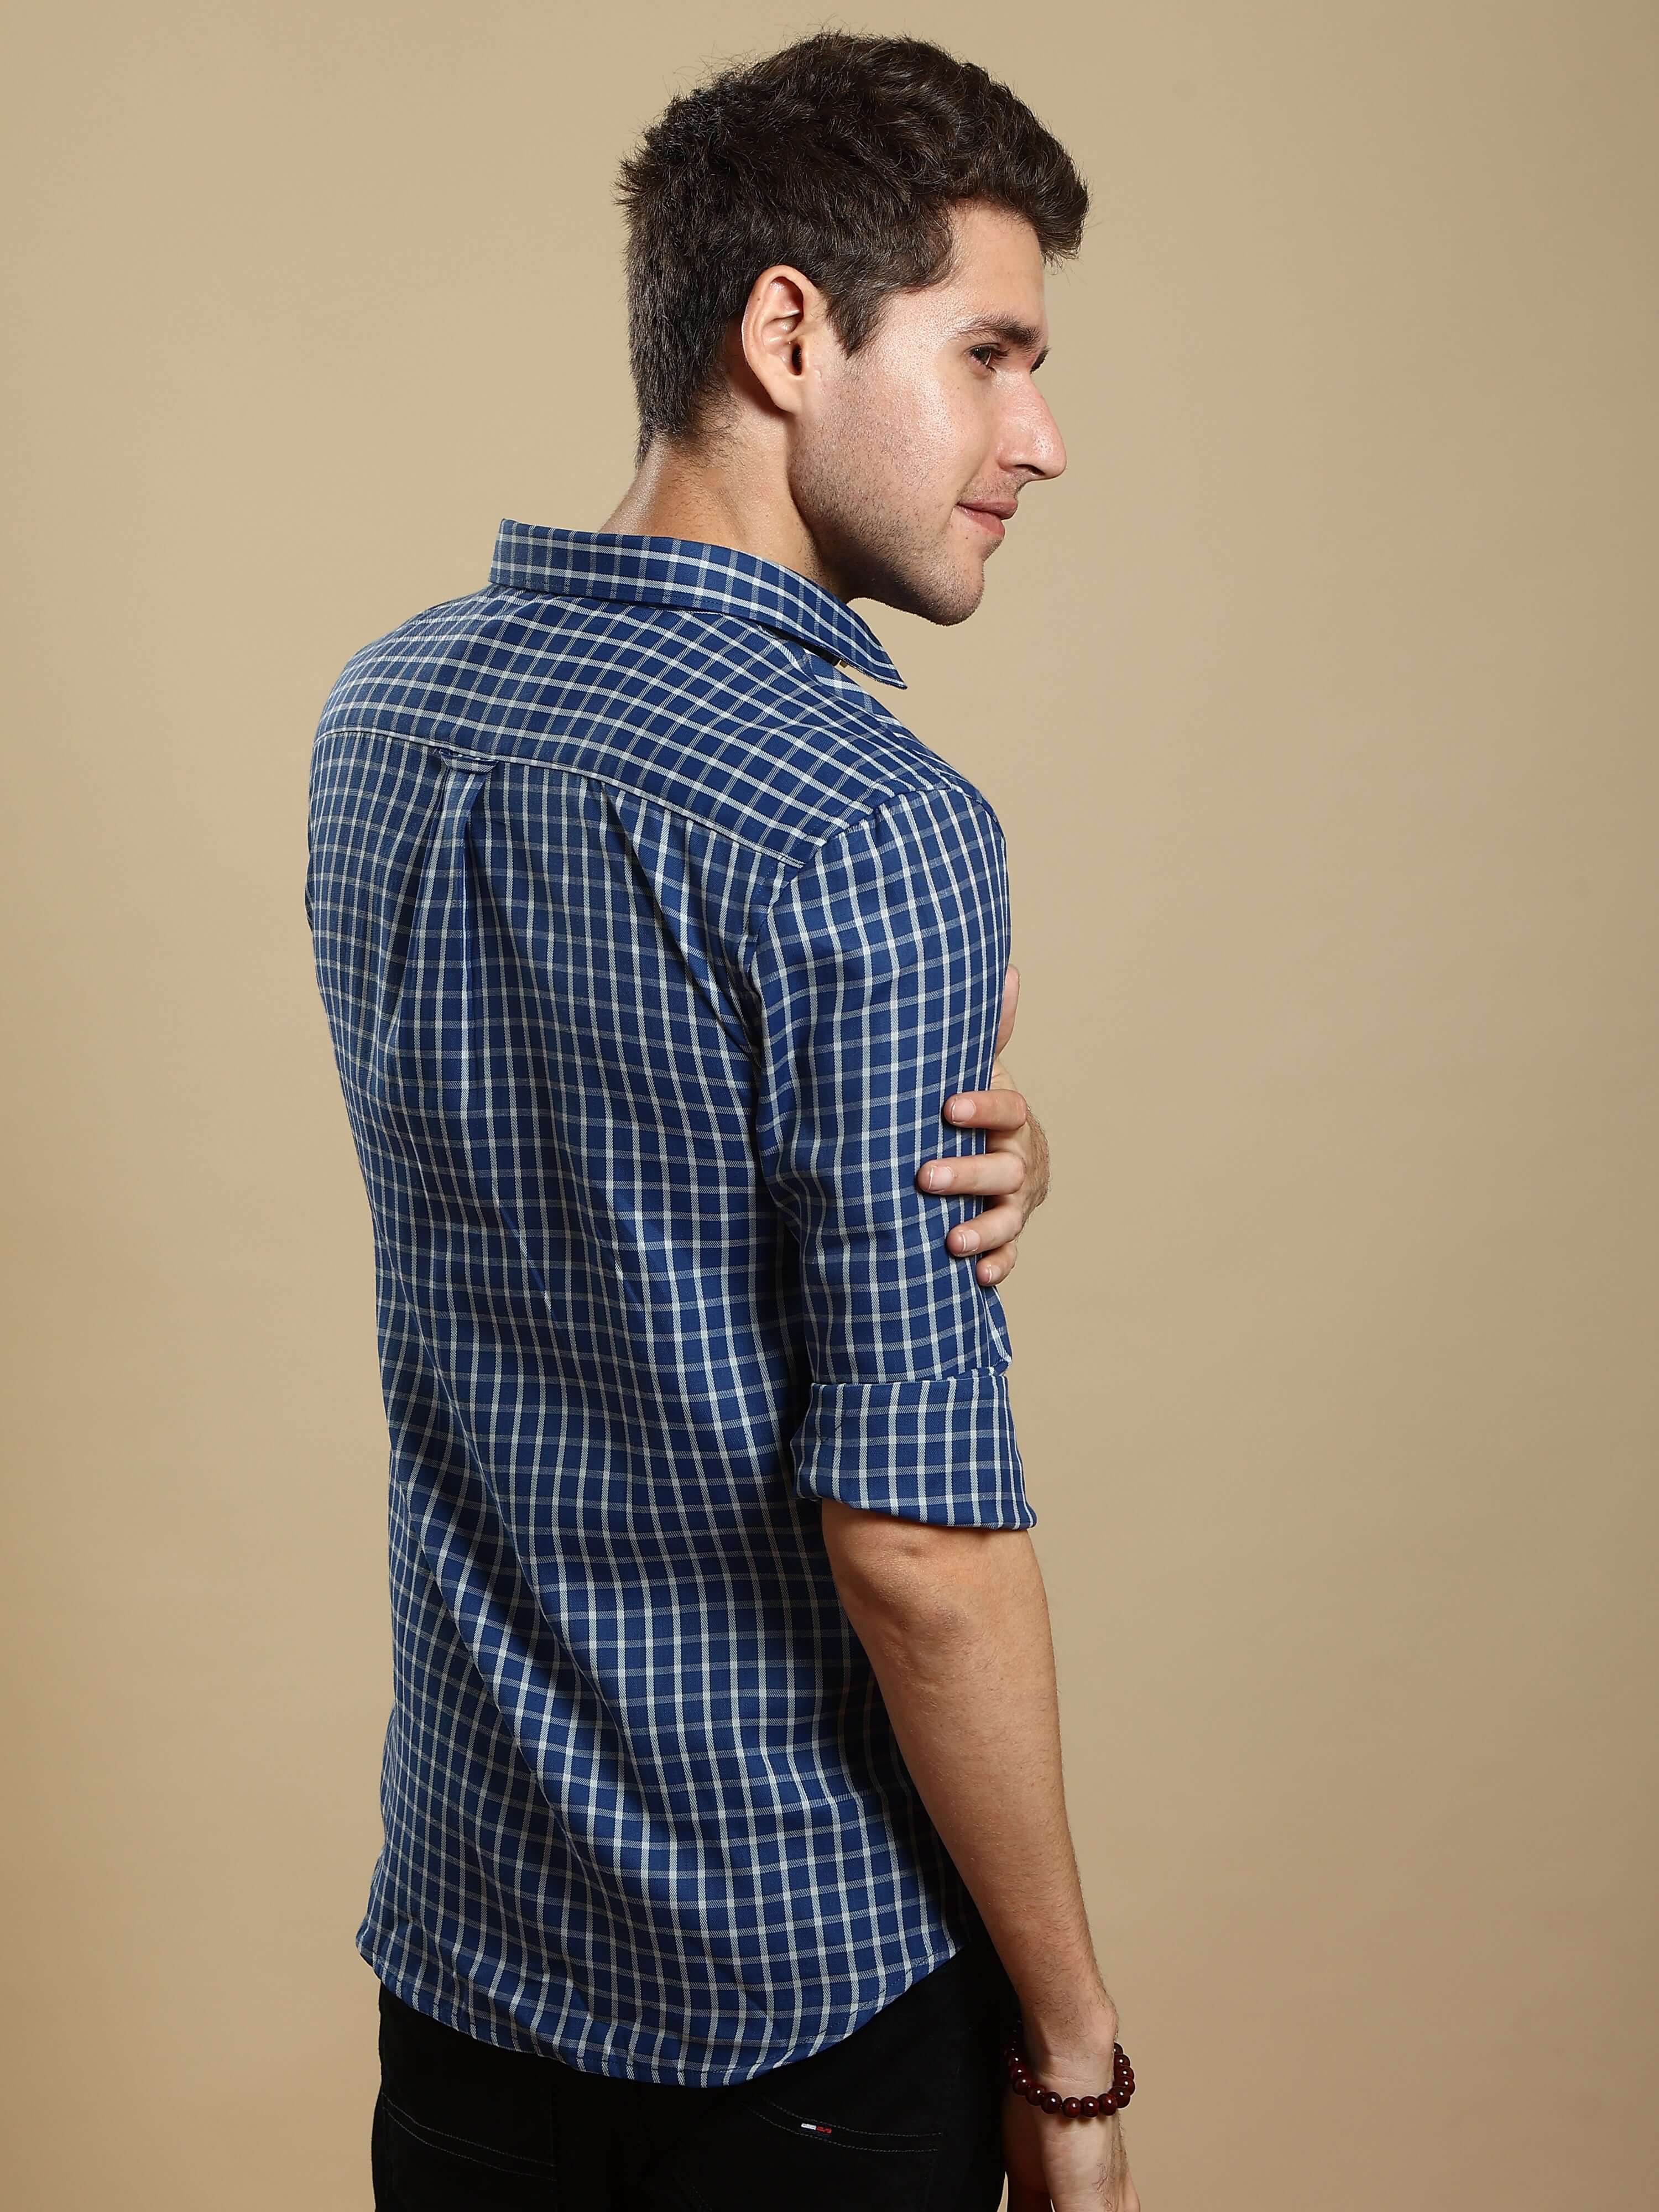 Grey & Navy casual square check full sleeves shirt_ ESTILOCUS CASUAL SHIRT_ estilocus